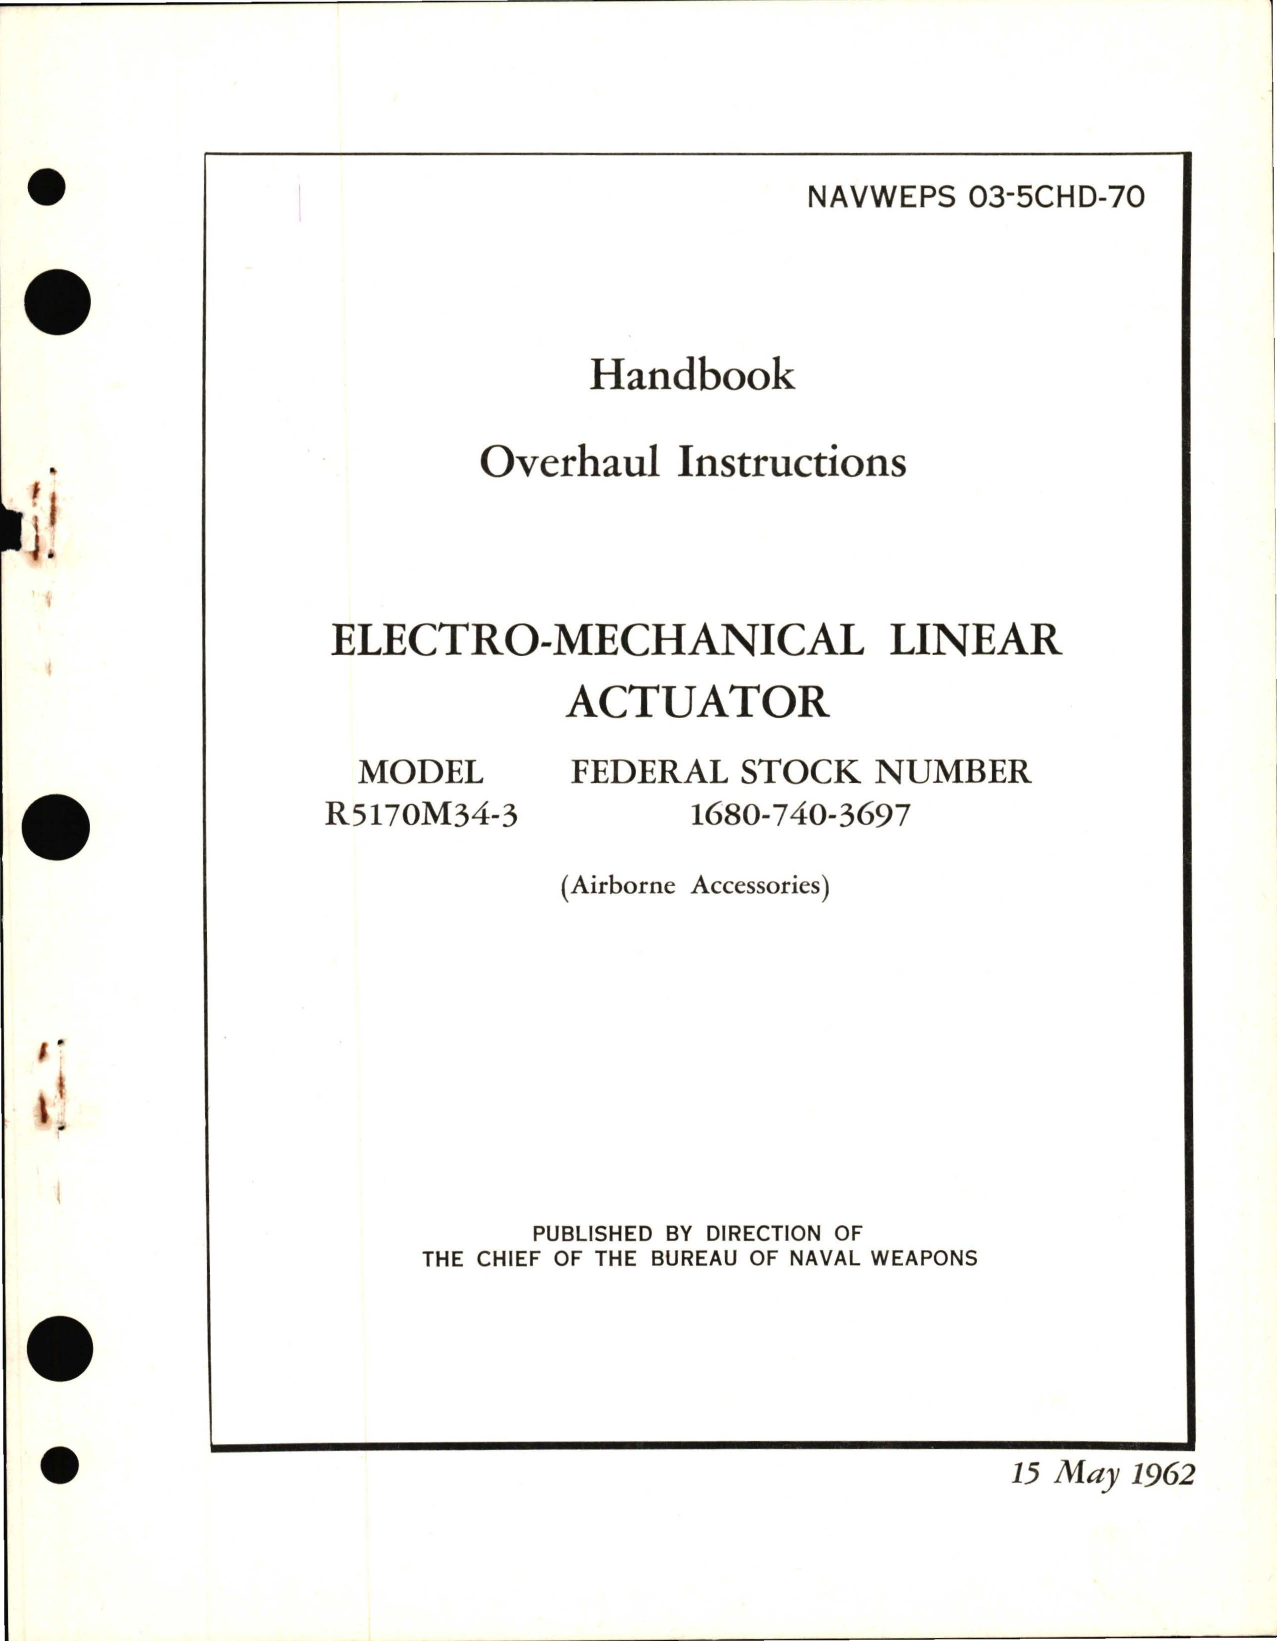 Sample page 1 from AirCorps Library document: Overhaul Instructions for Electro-Mechanical Linear Actuator R5170M34-3